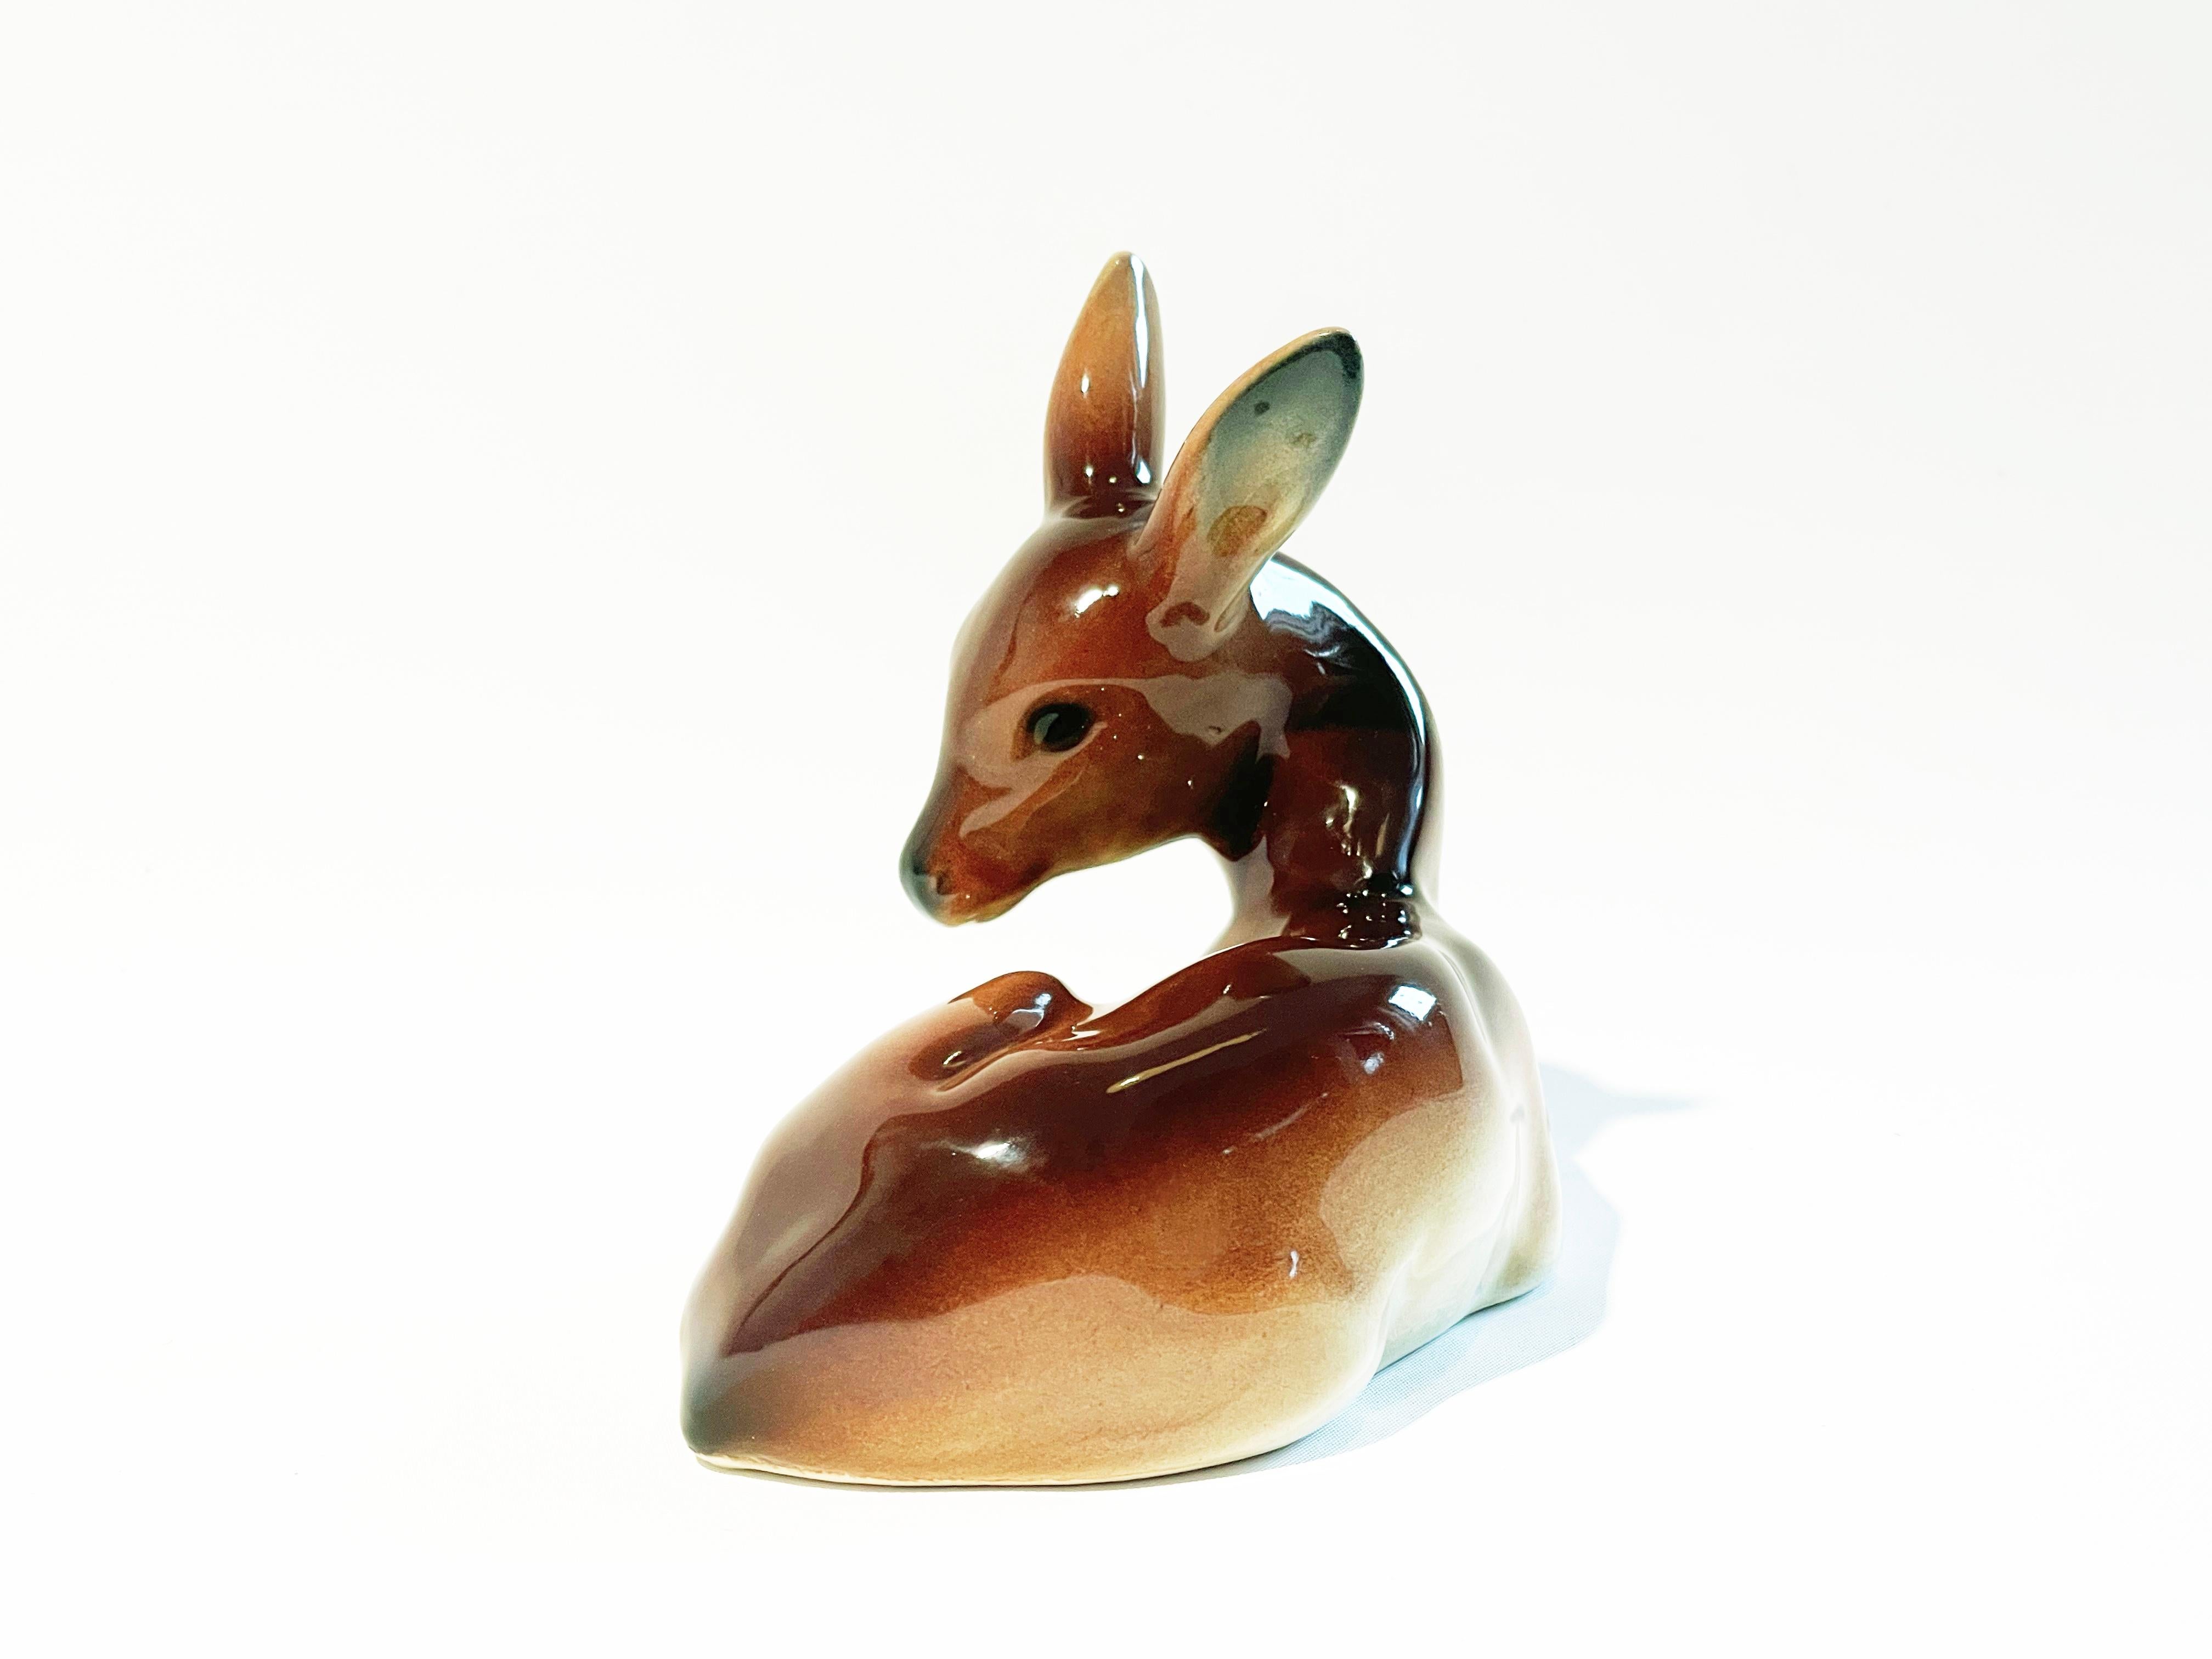 A beautifully designed fawn by W. Goebel, one of Western Germany's most famous makers of mid-century figurative art.
Designed and made around 1950-1960.
Started as Cortendorf, later it was taken over by W. Goebel.

The figurine comes in a shiny,